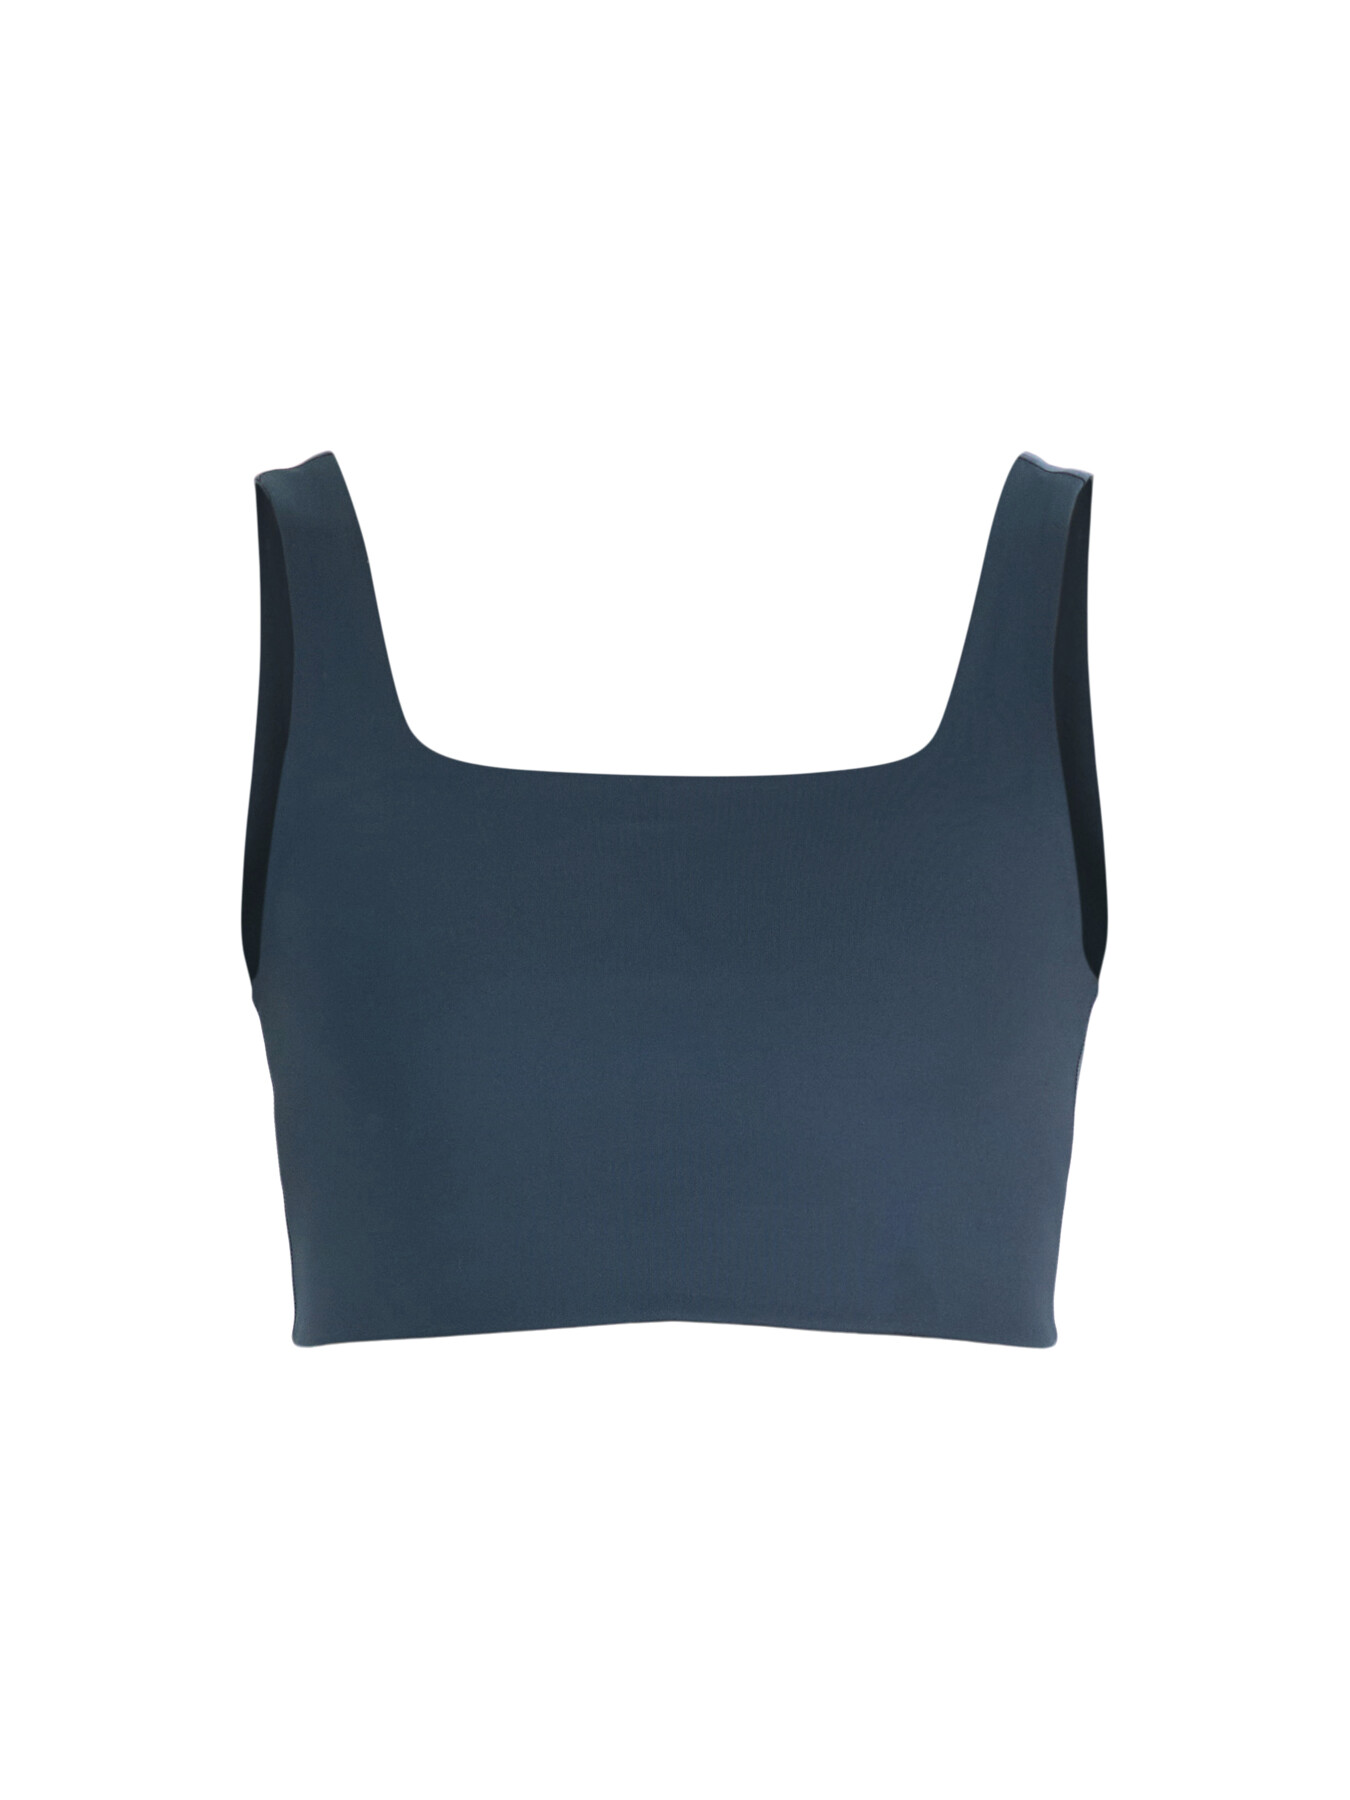 Girlfriend Collective Women's Tommy Cropped Bra Blue